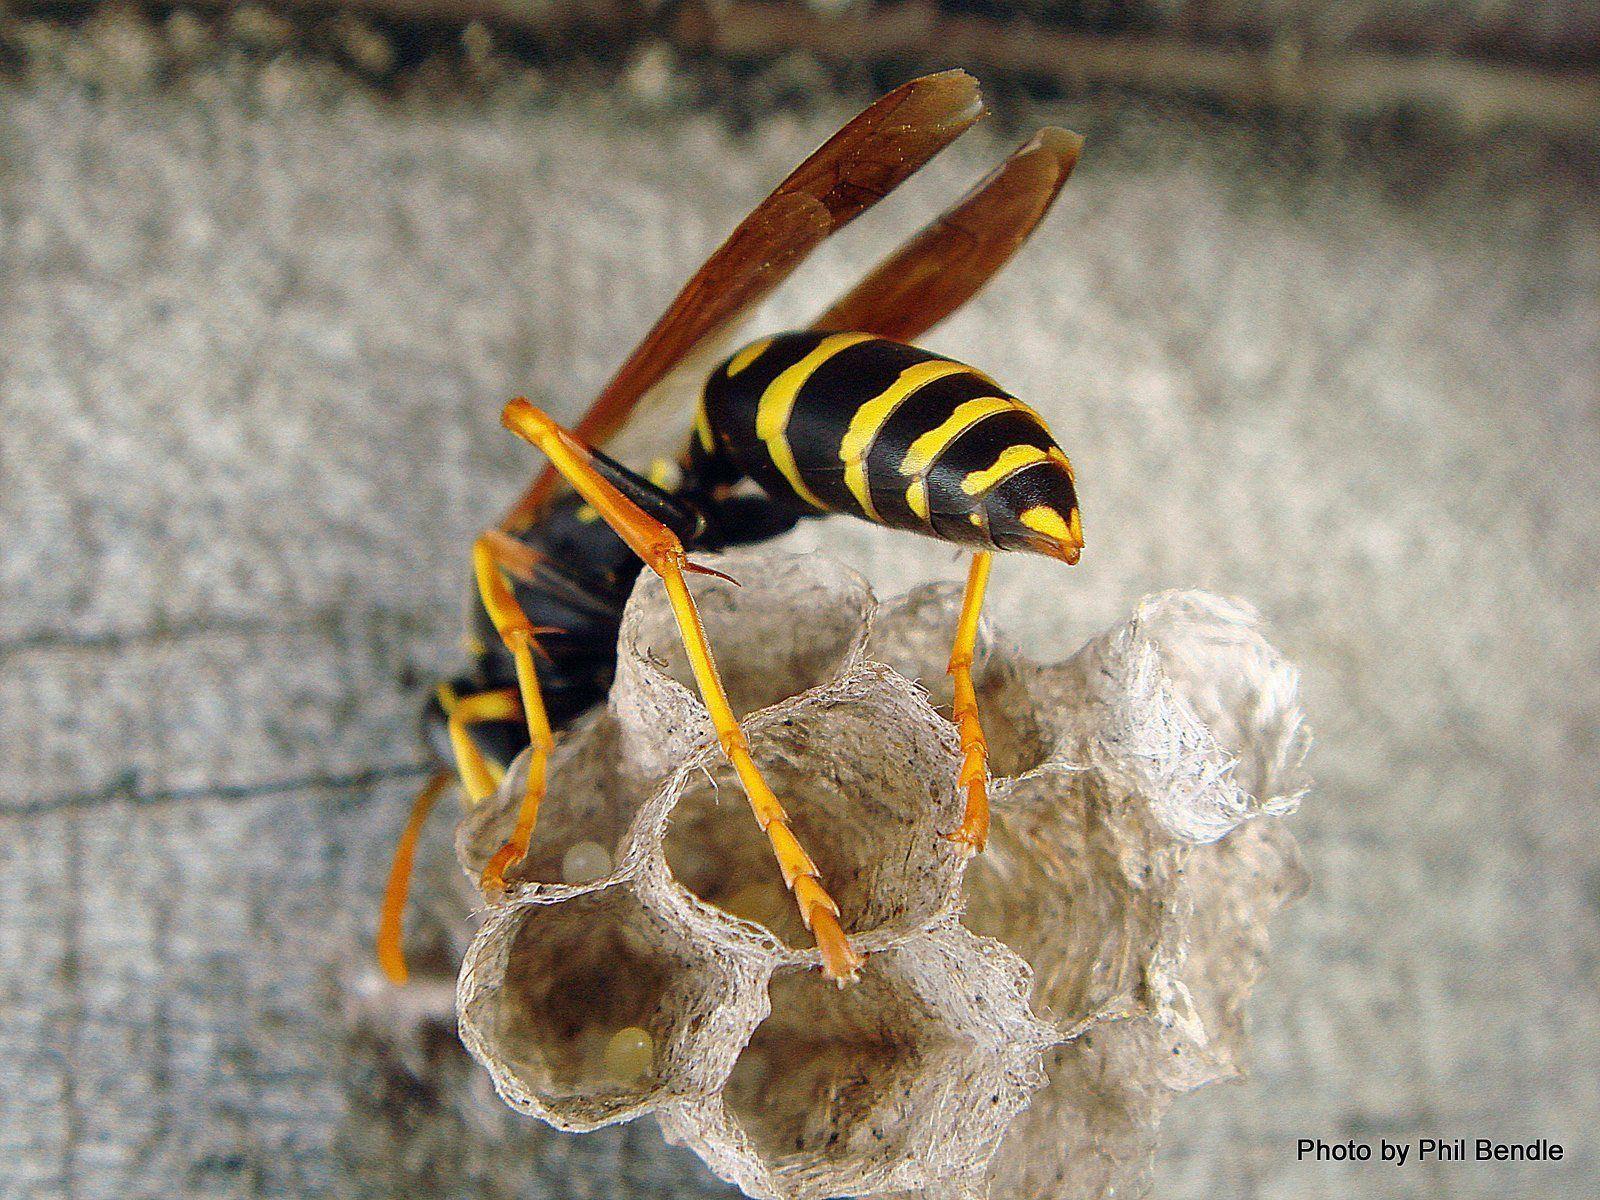 Asian paper wasp